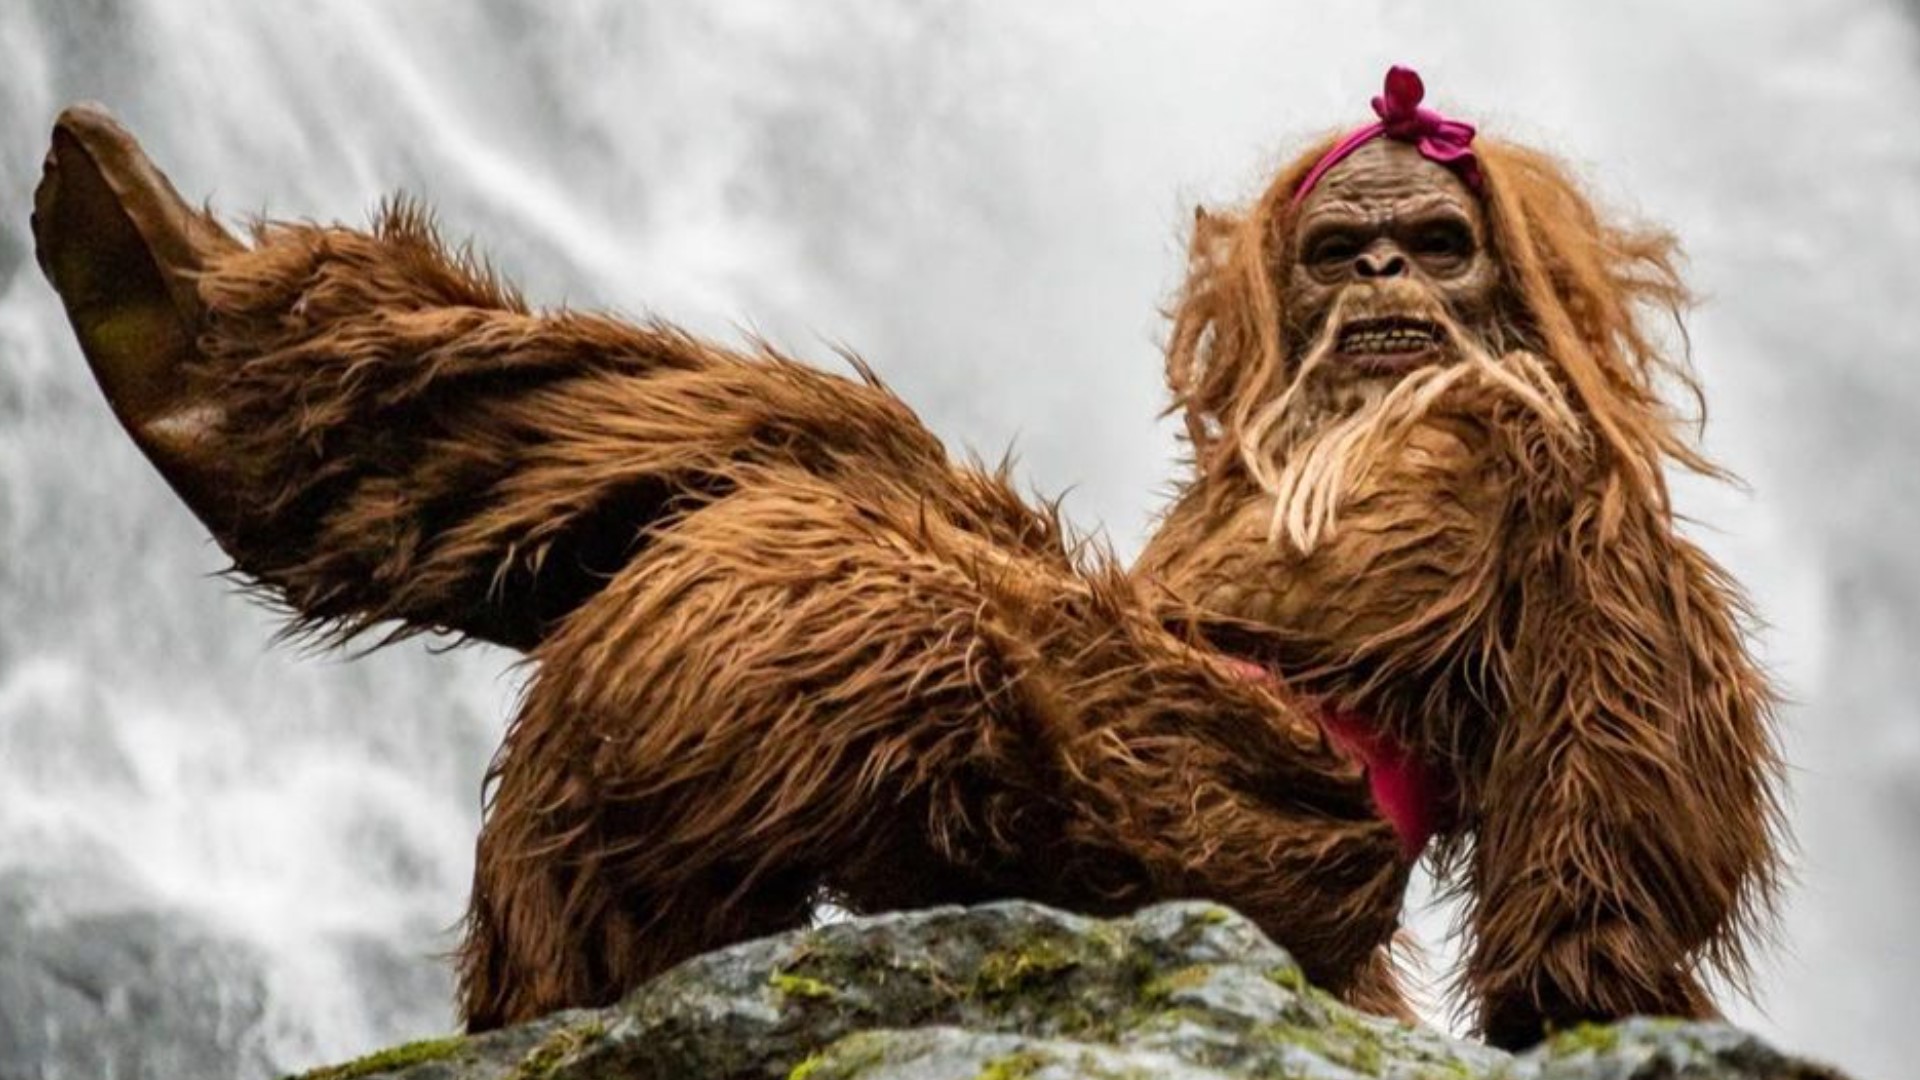 Bigfoot Bae is stepping out of the Pacific Northwest woods and getting on Instagram! She's dancing her way into the hearts of thousands. #k5evening